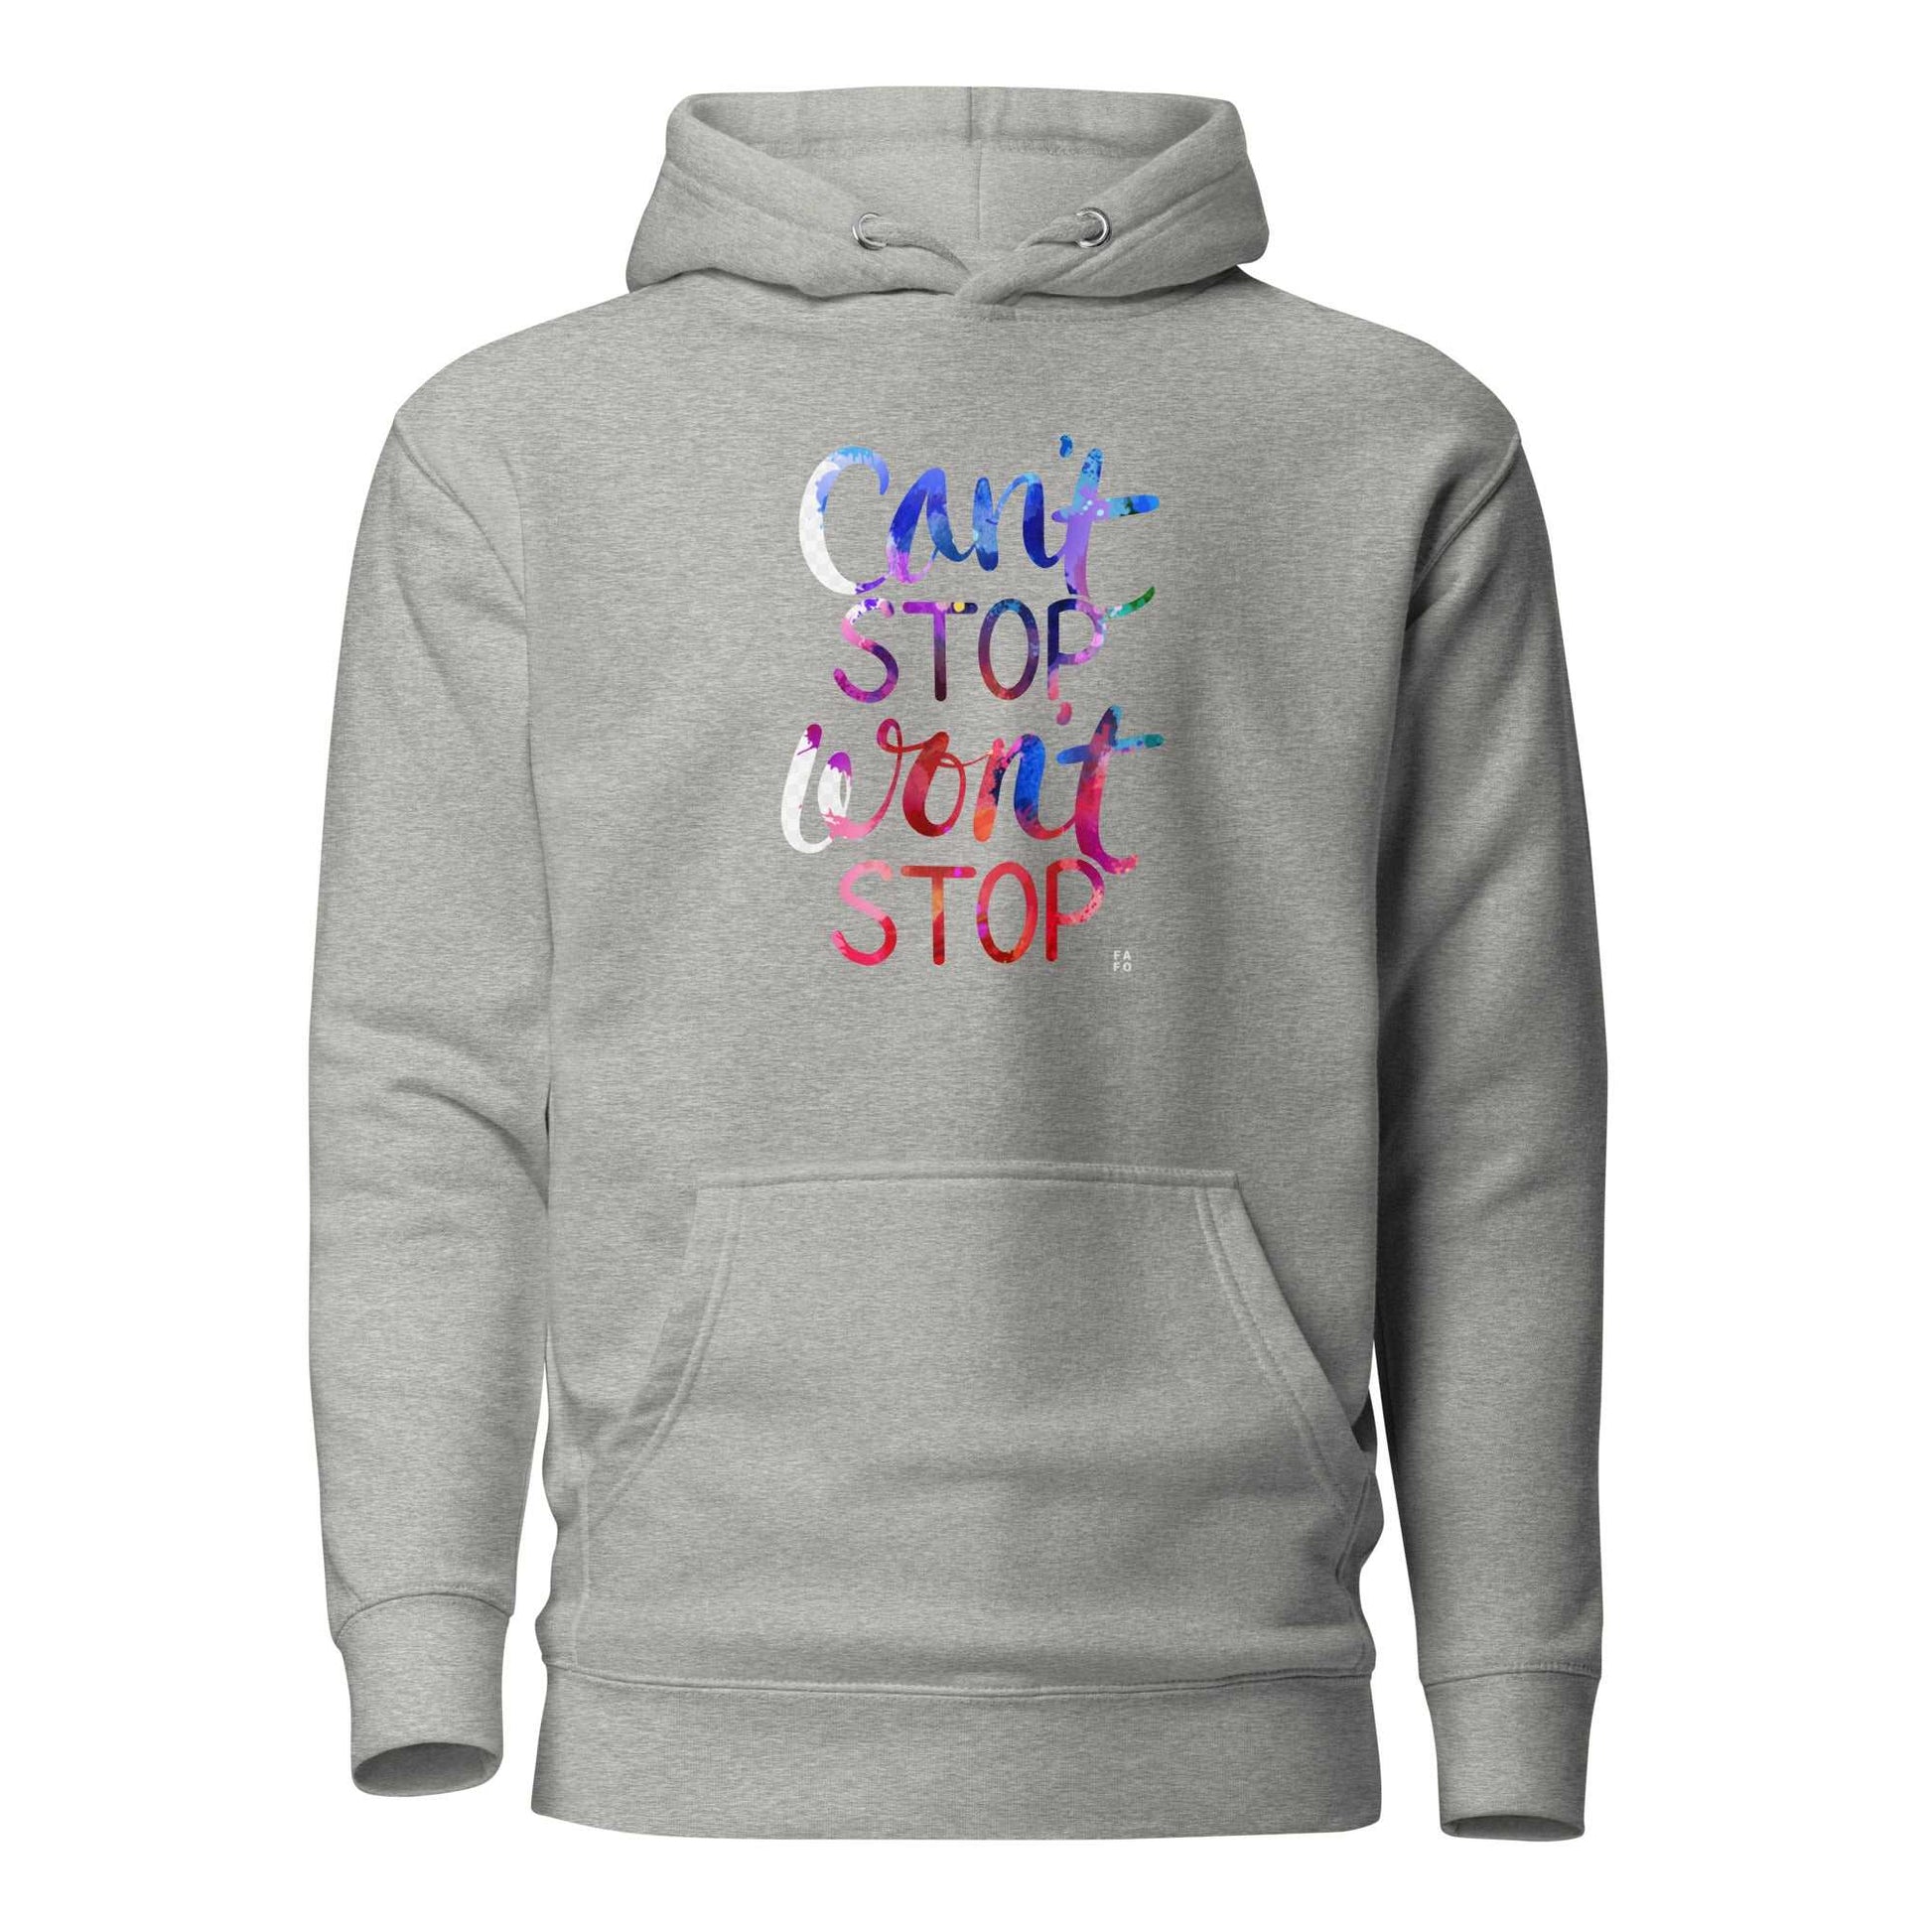 Women's Hoodie - Can't Stop Won't Stop